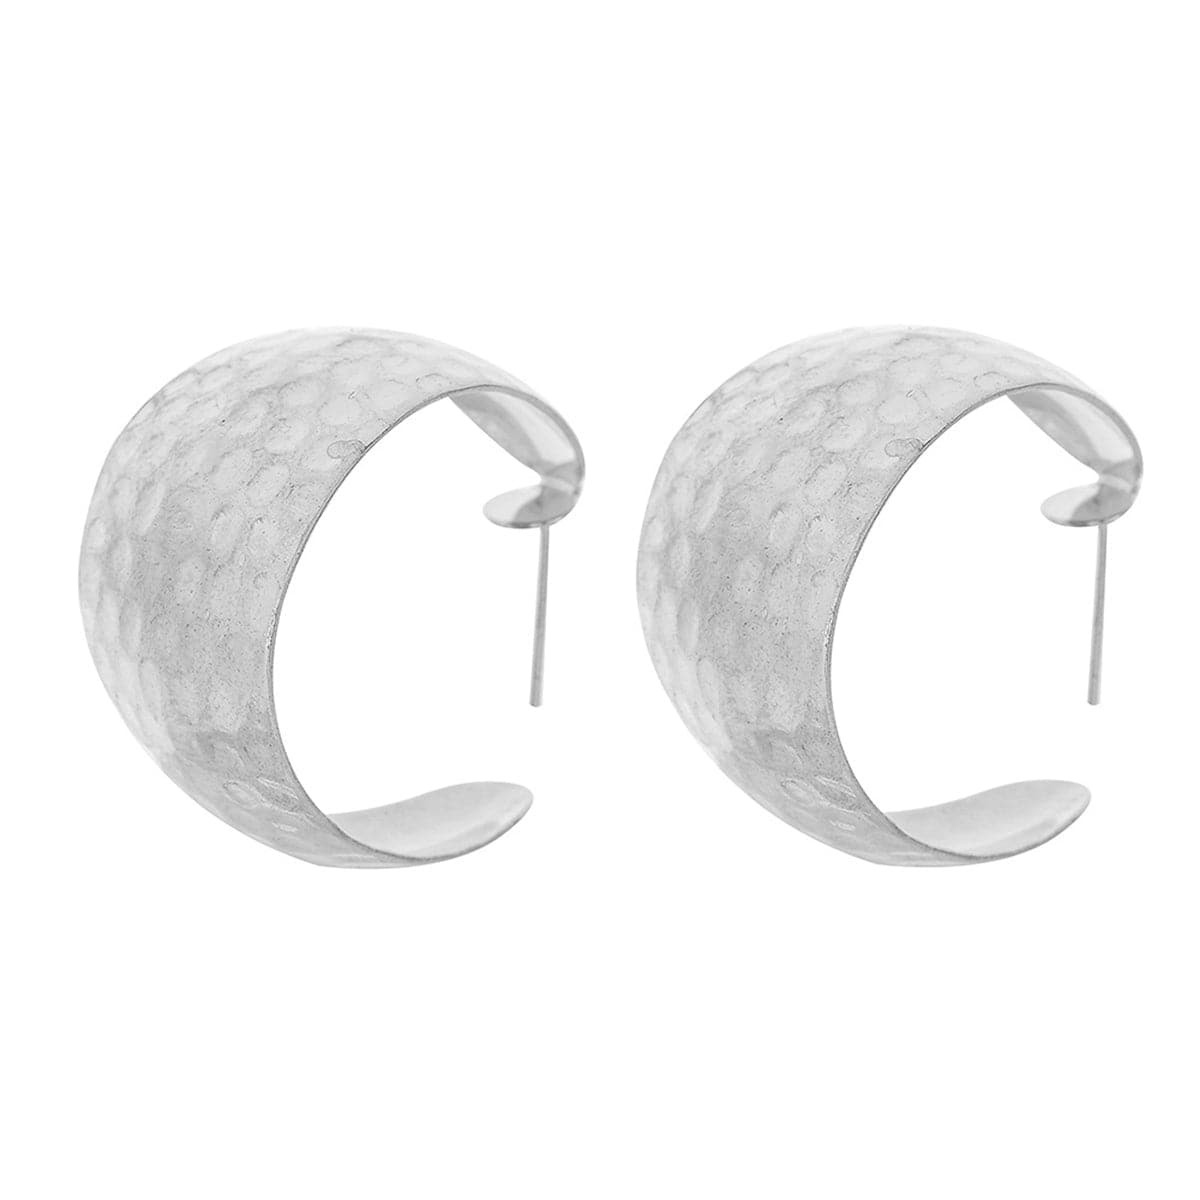 Silver-Plated Uneven-Surface C-Shape Drop Earrings